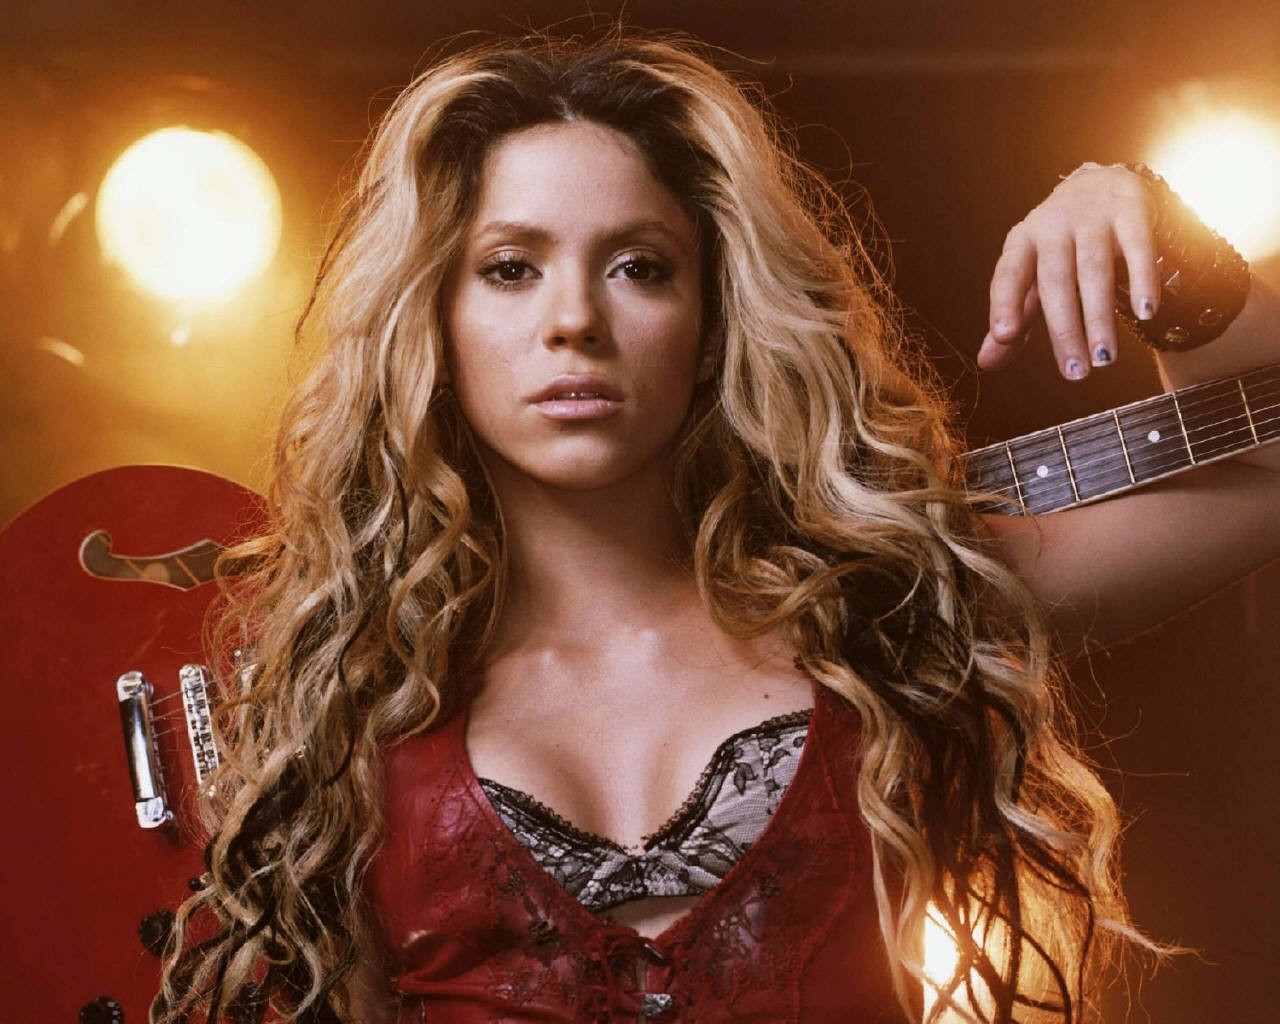 Superstar Shakira wallpapers and images - wallpapers, pictures, photos